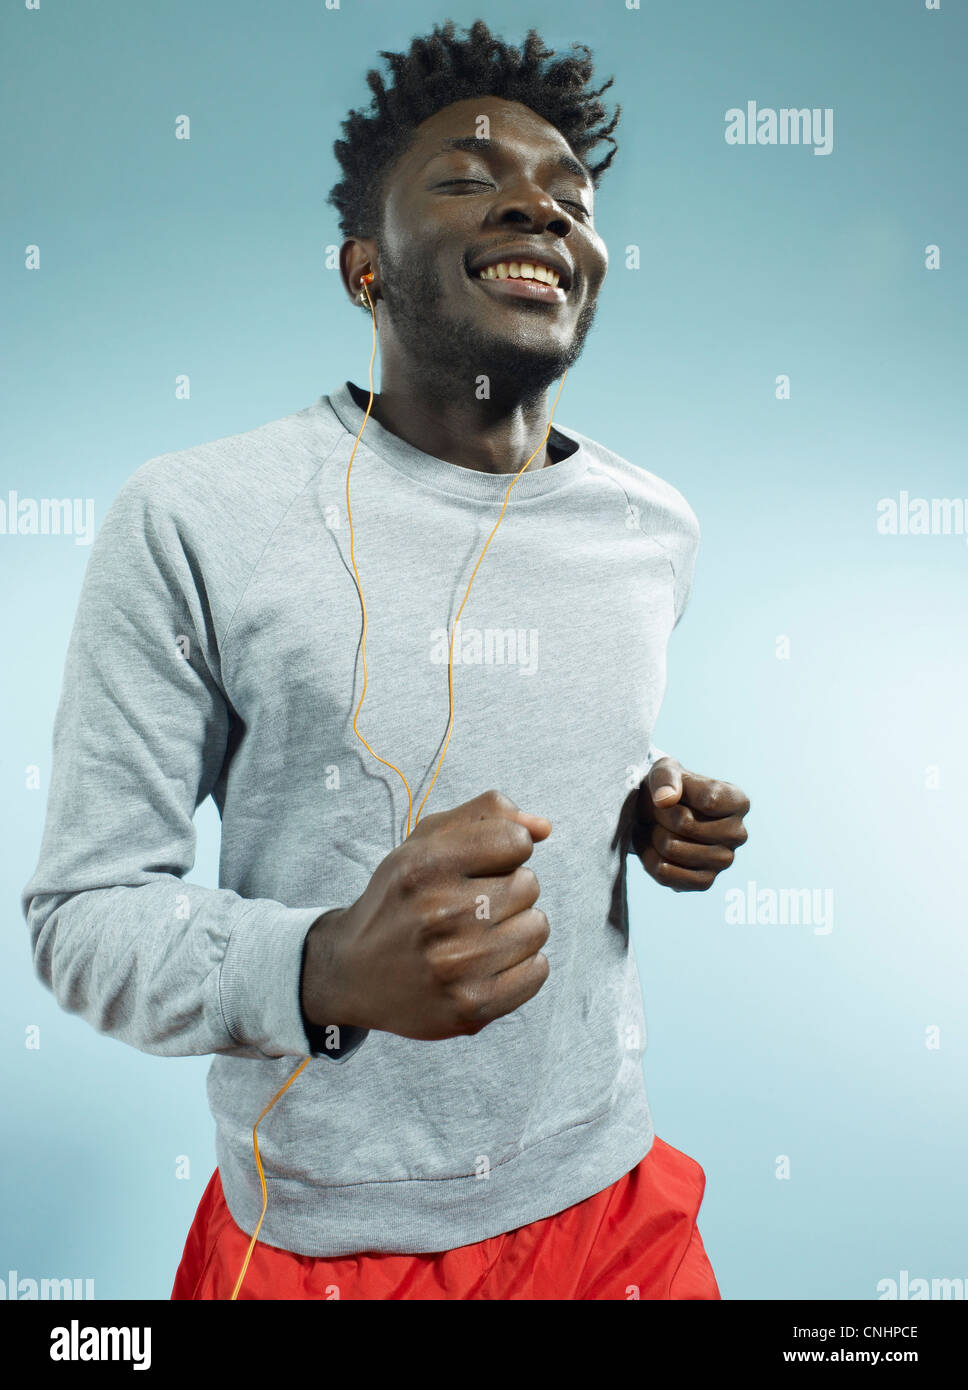 A young man wearing earbuds and running Stock Photo